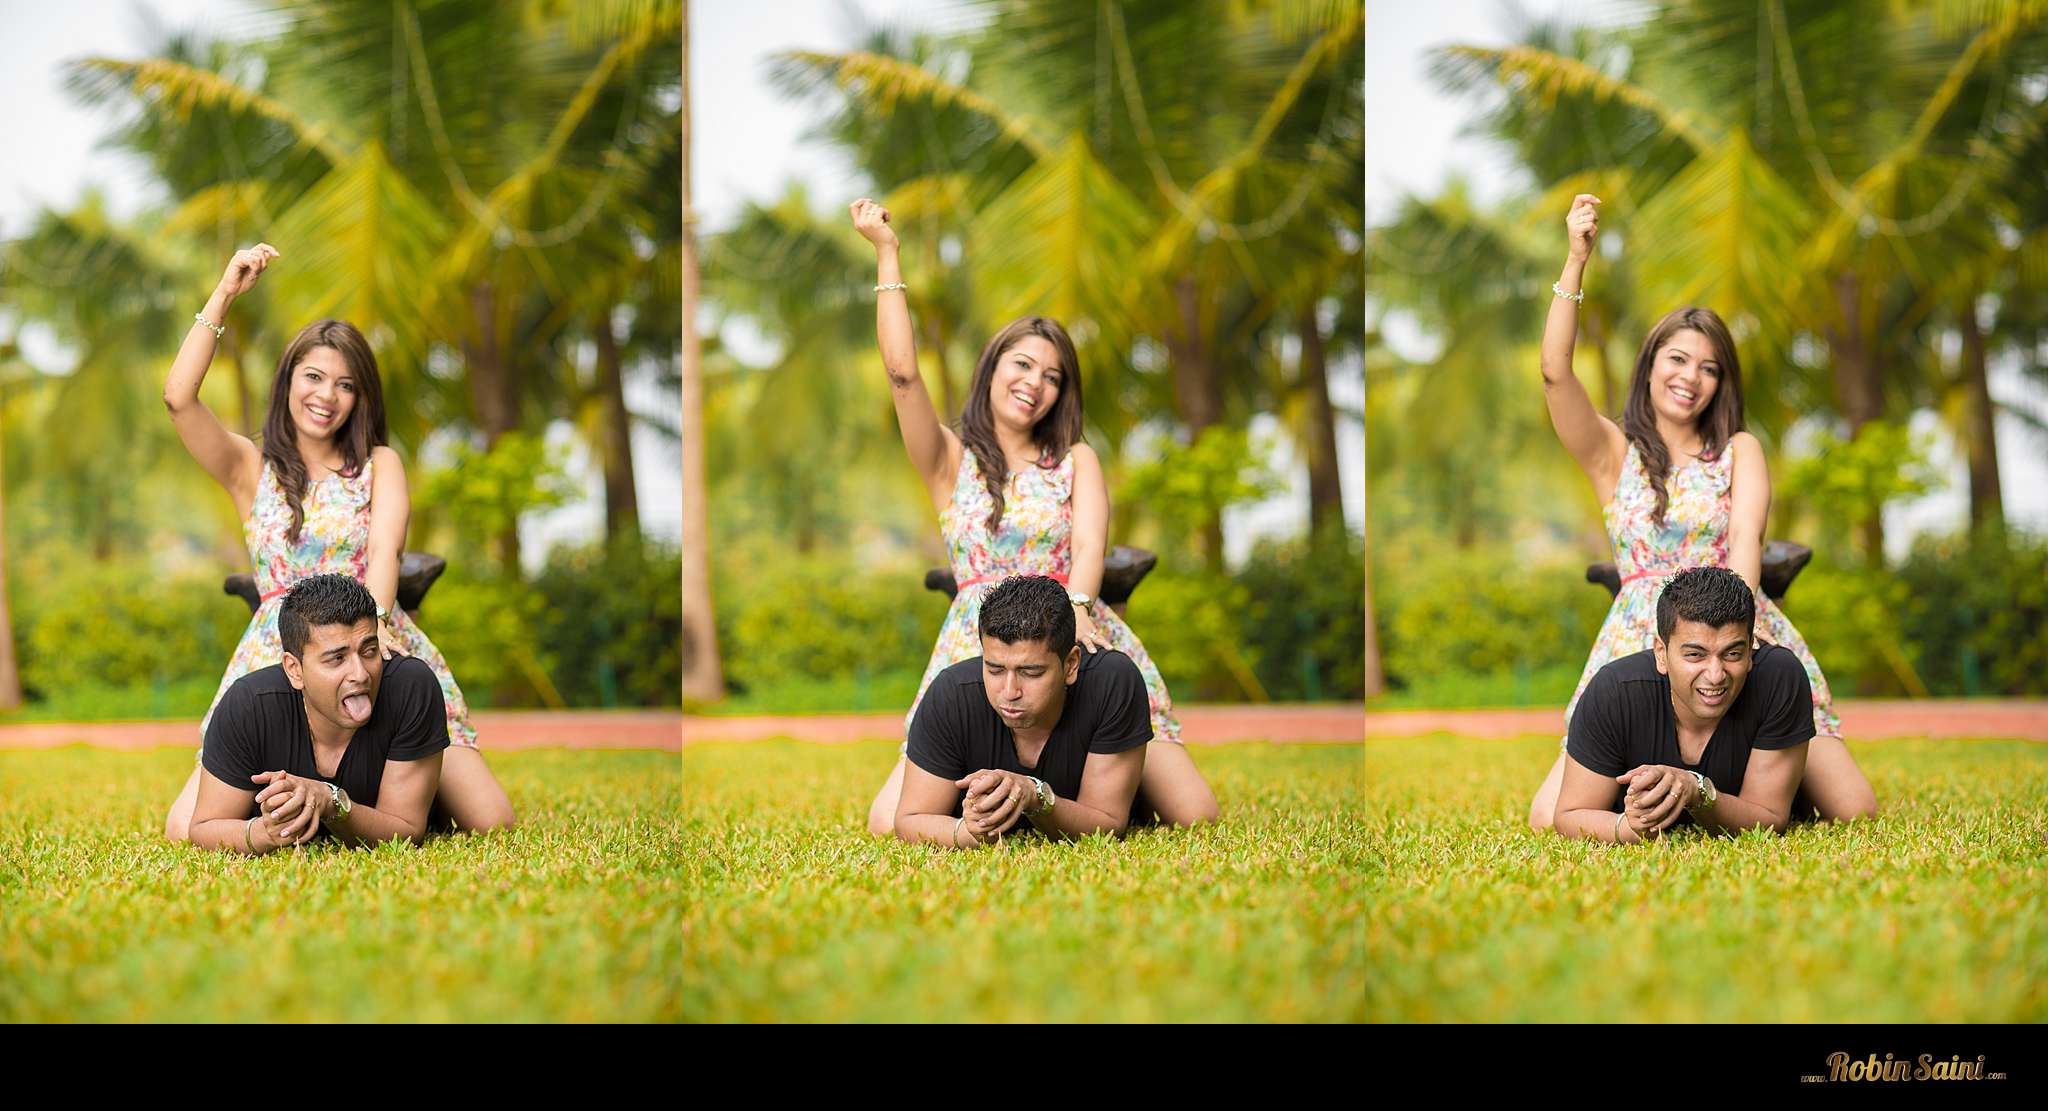 Trending: Quirky Pre-Wedding Shoot Ideas For Couples